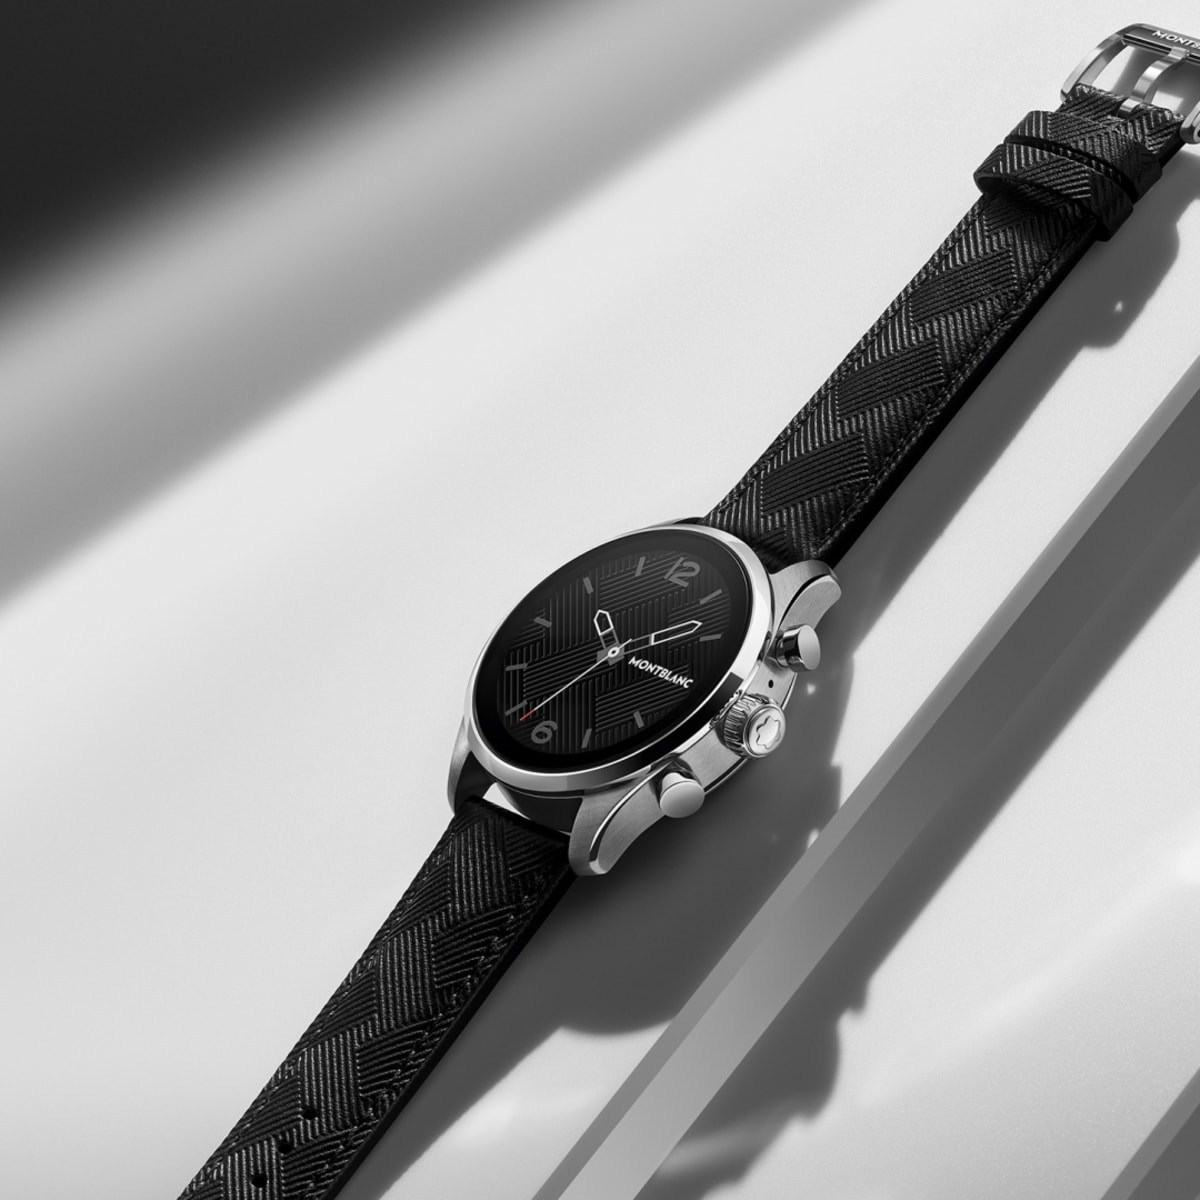 Montblanc Summit 3 Is a Smartwatch for Traditional Watch Lovers